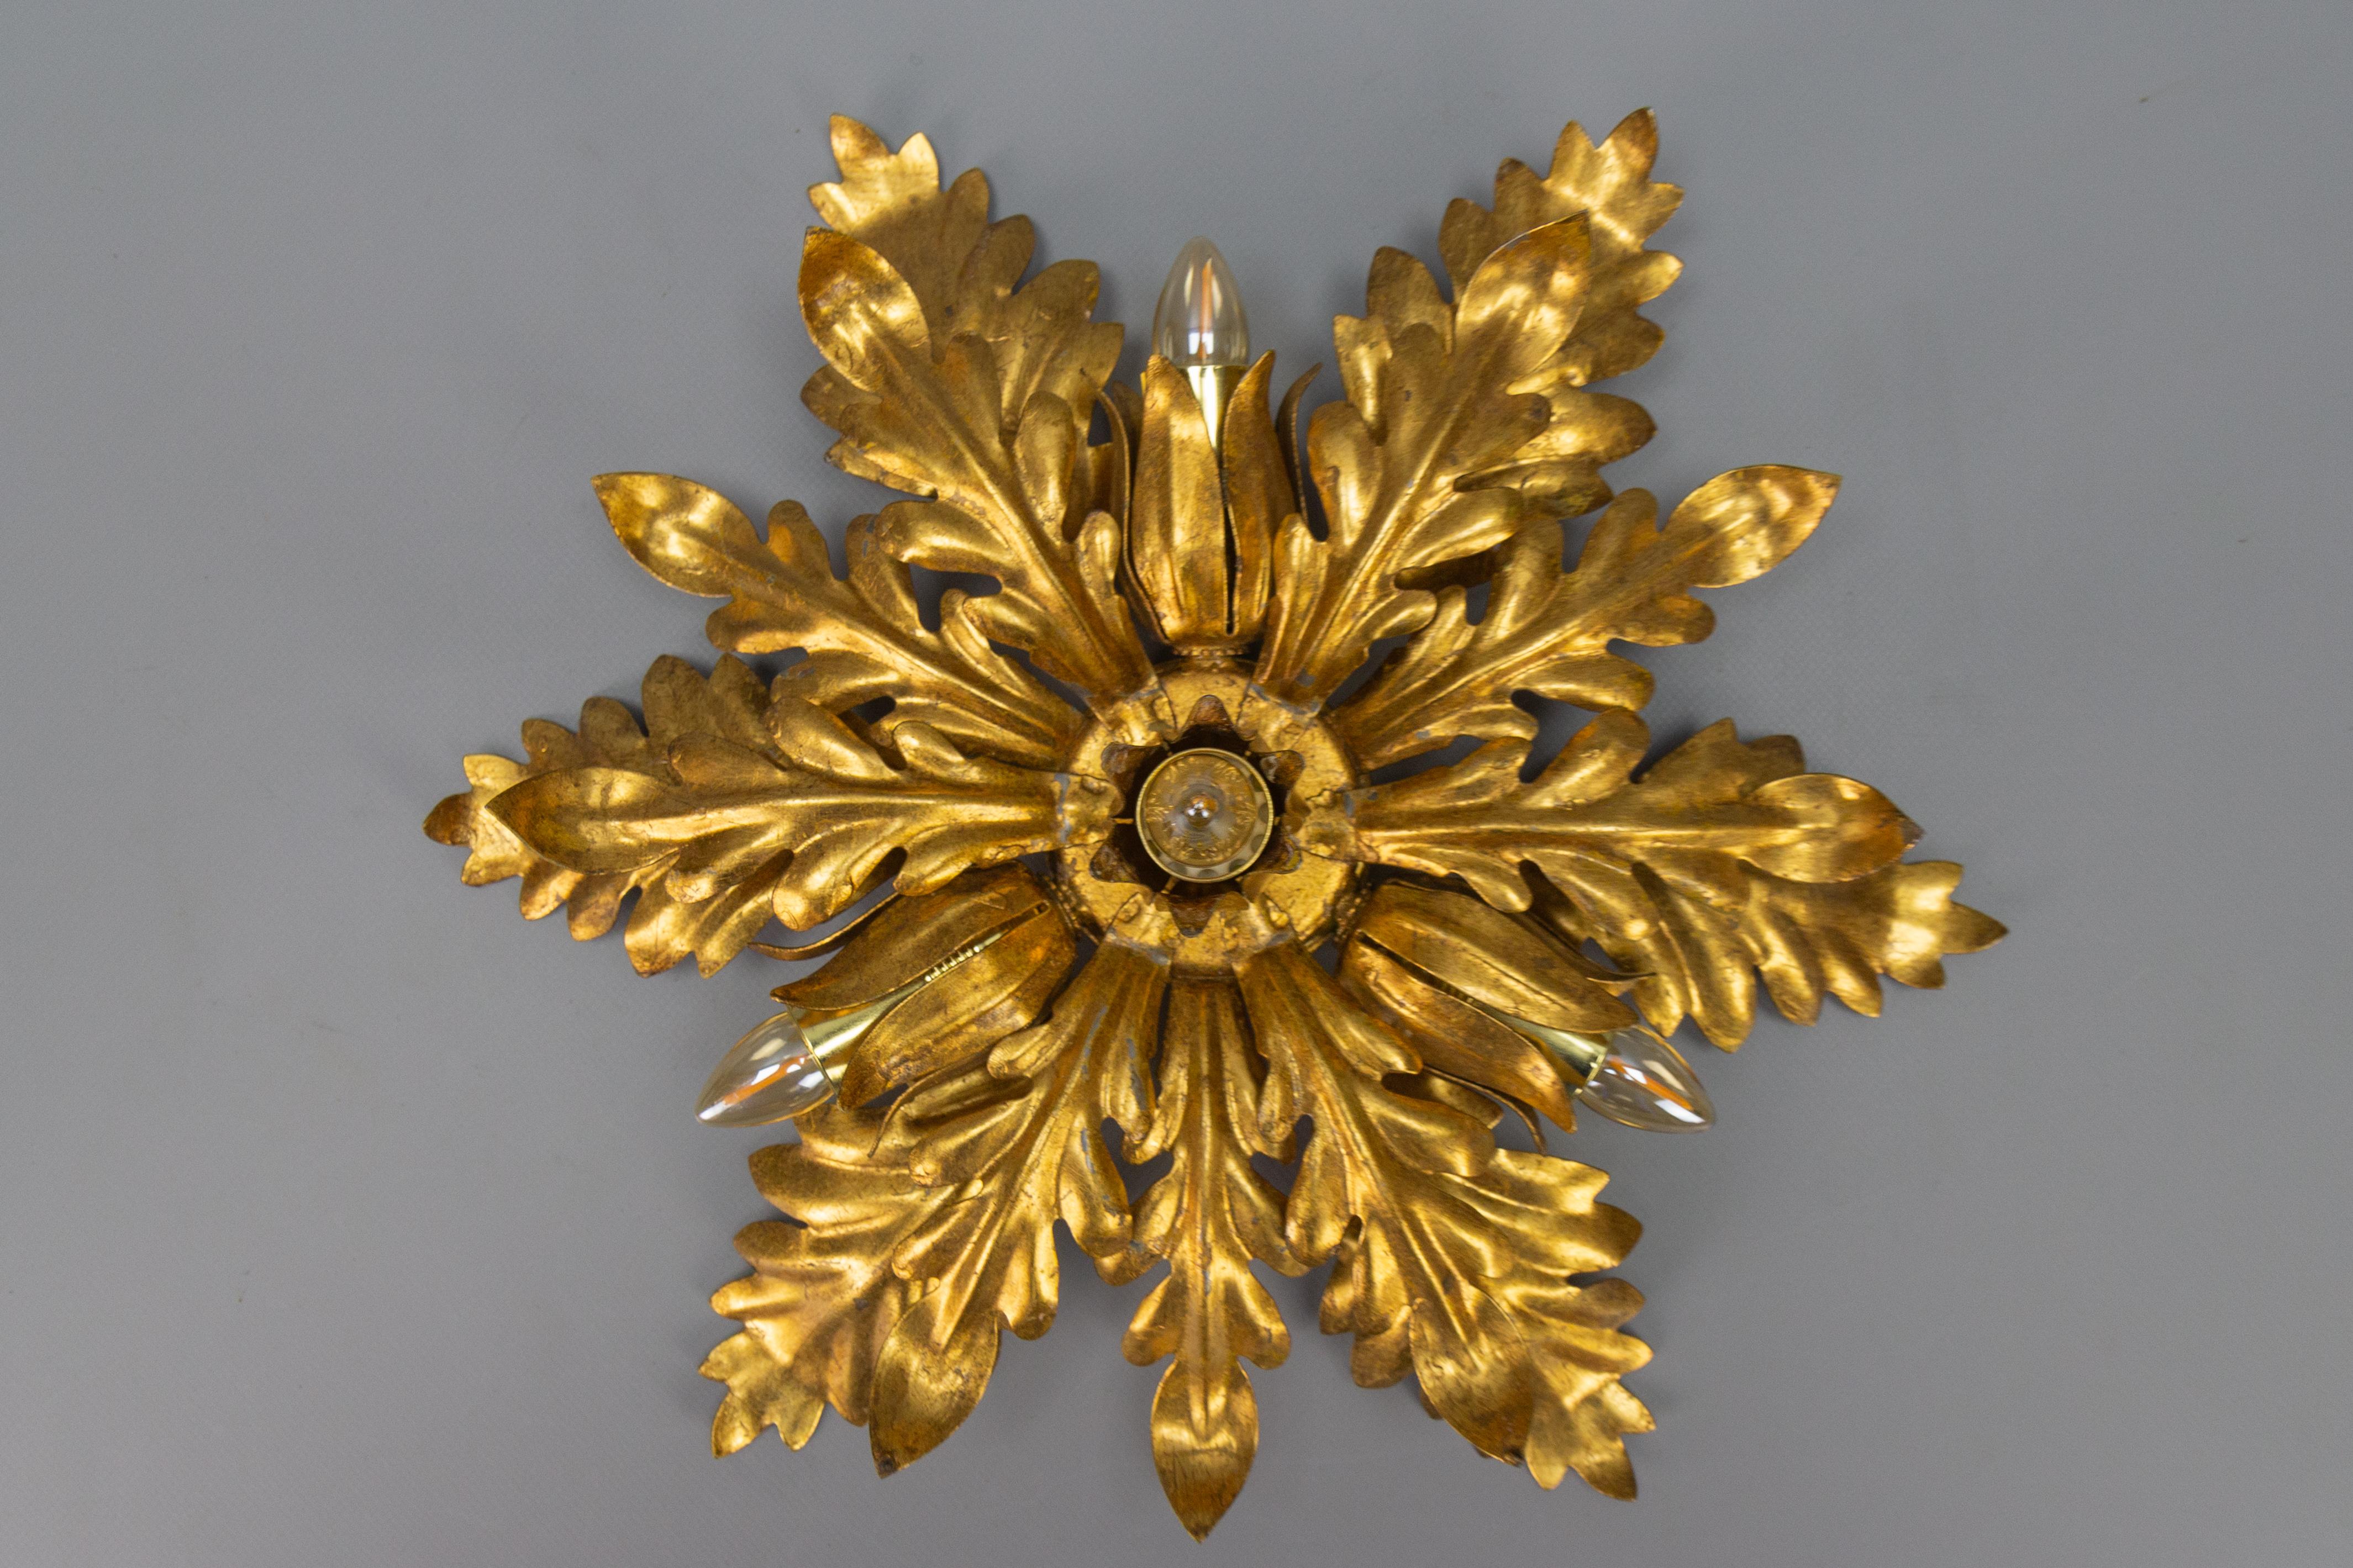 Gilt metal leafed sunburst-shaped four-light flush mount or wall lamp, circa the 1970s.
This adorable Hollywood Regency-style gilt metal flush mount is ornate with beautifully sculpted golden leaves that form a shape of a sunburst or large flower.